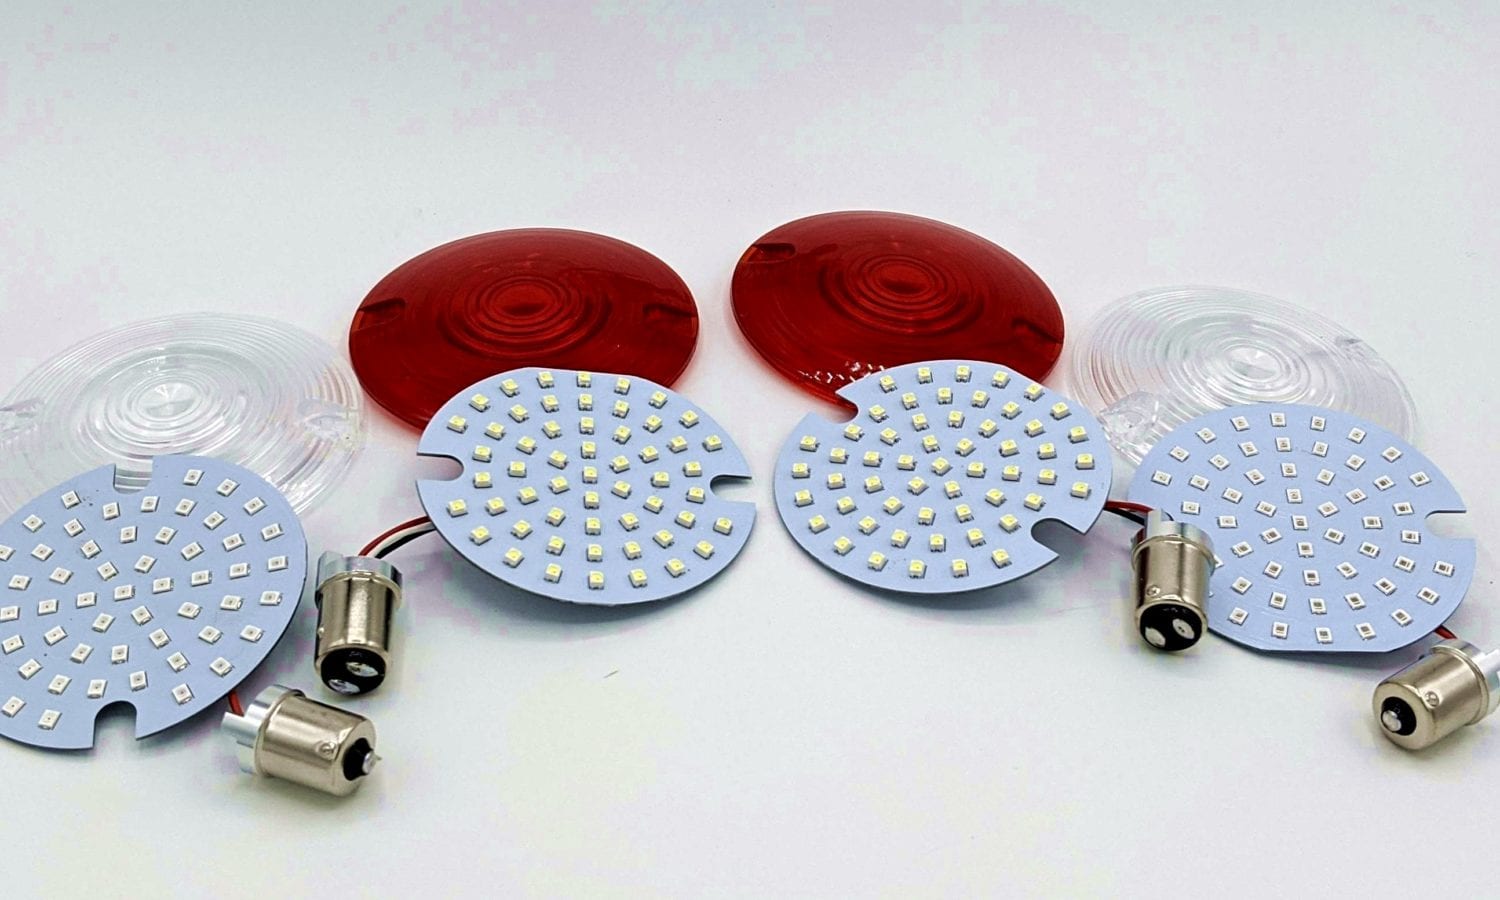 Featured image for “Super Bright Pancake 8 Piece Flat Style Blinker Set”